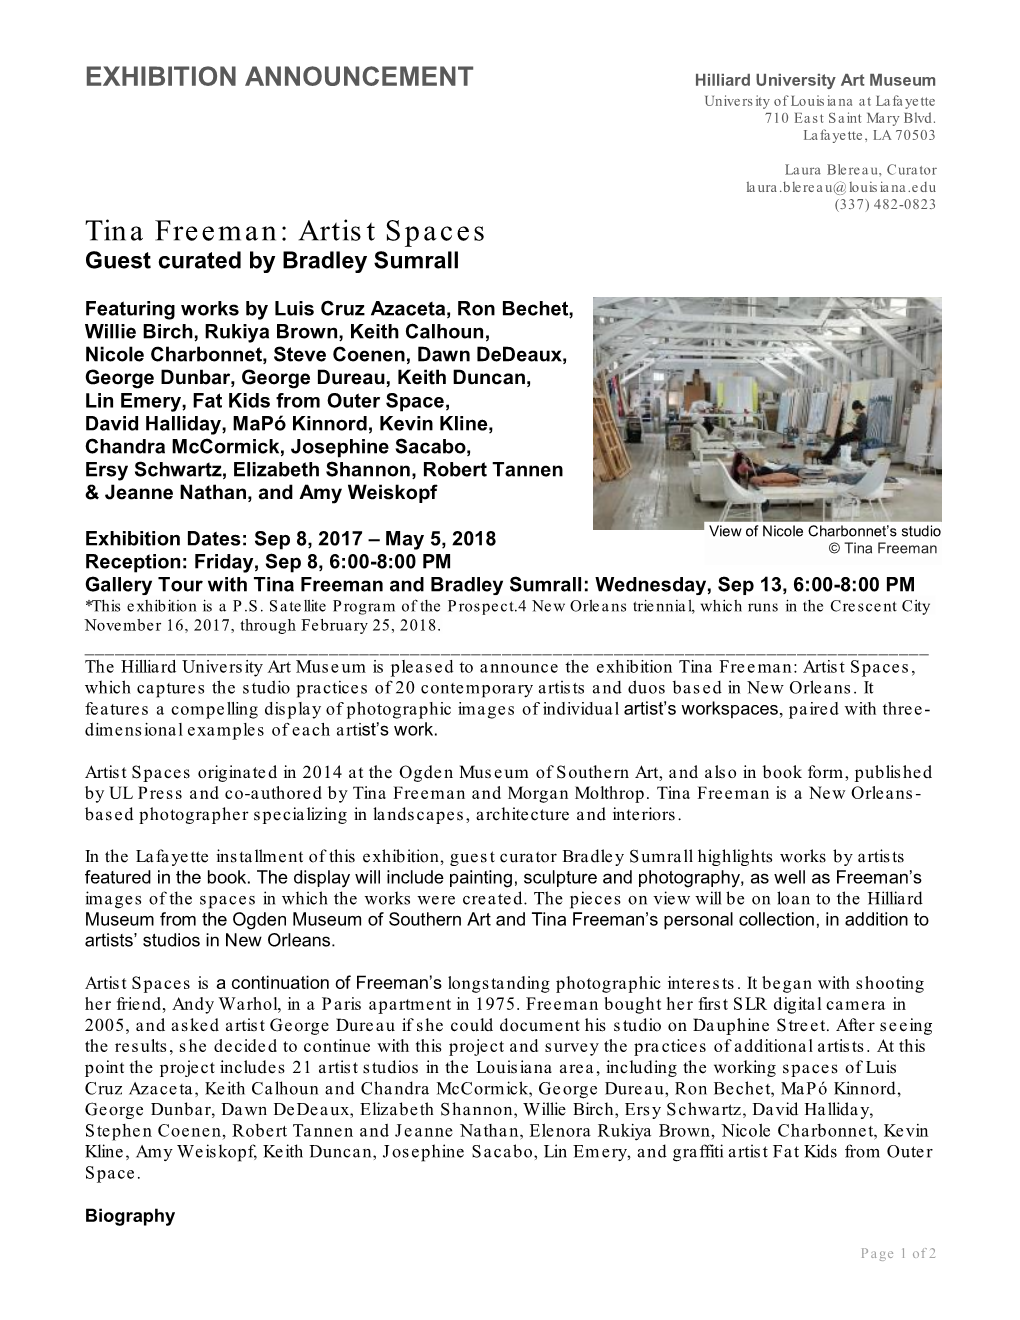 Tina Freeman: Artist Spaces Guest Curated by Bradley Sumrall